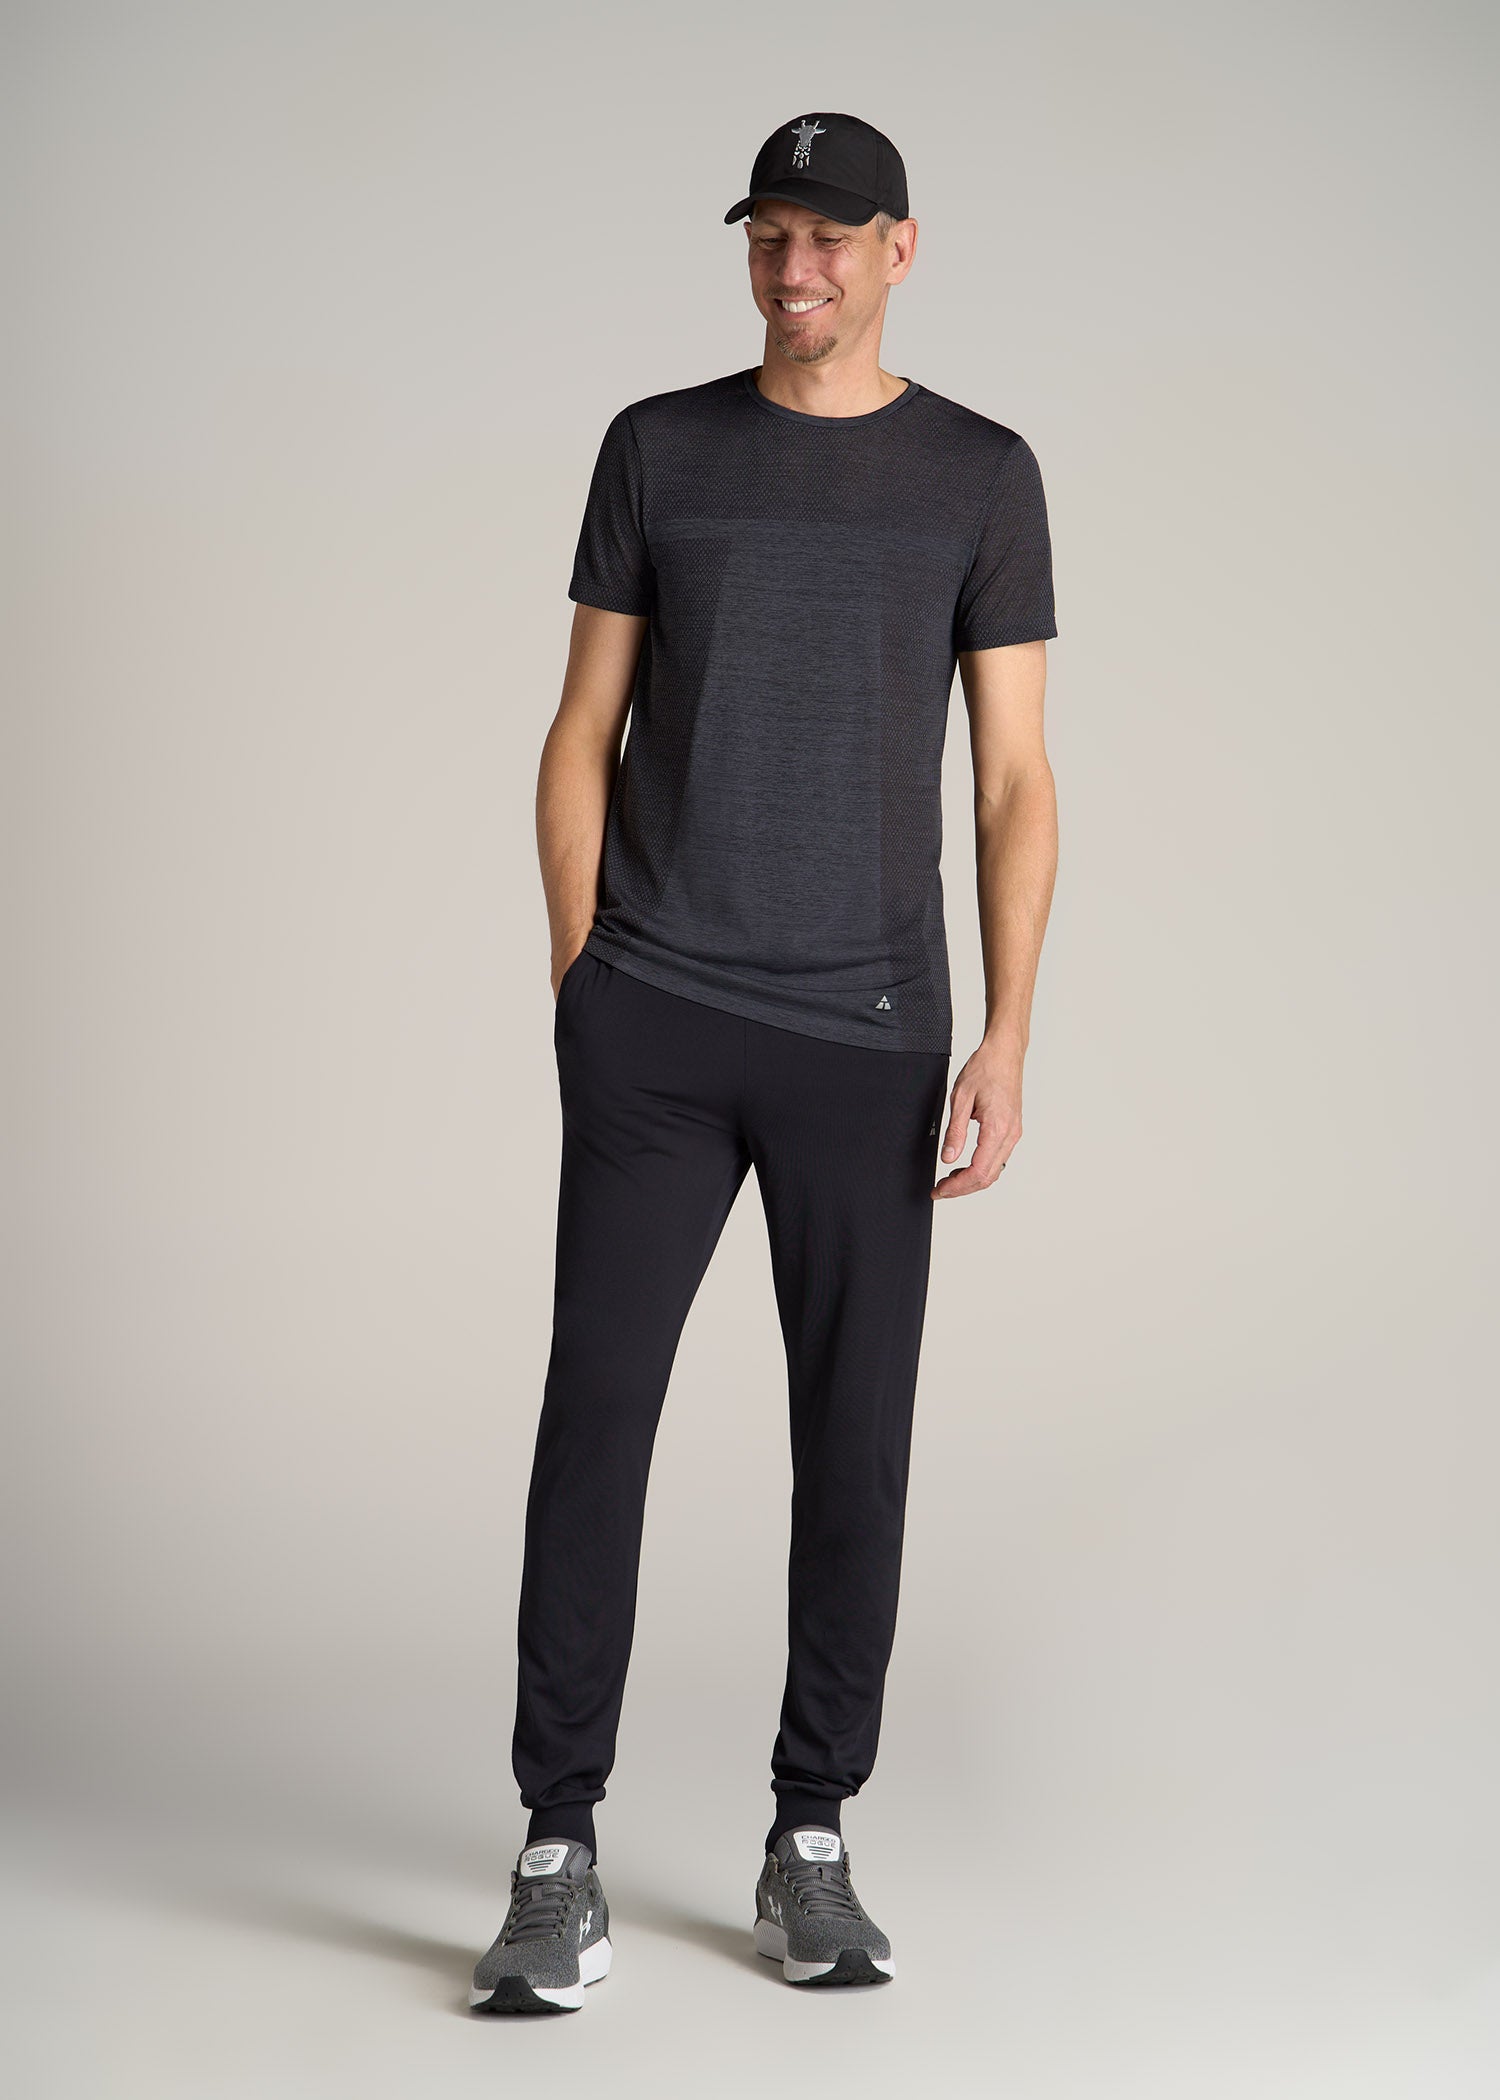 A.T. Performance MODERN-FIT Engineered Athletic Tall Tee in Charcoal Mix